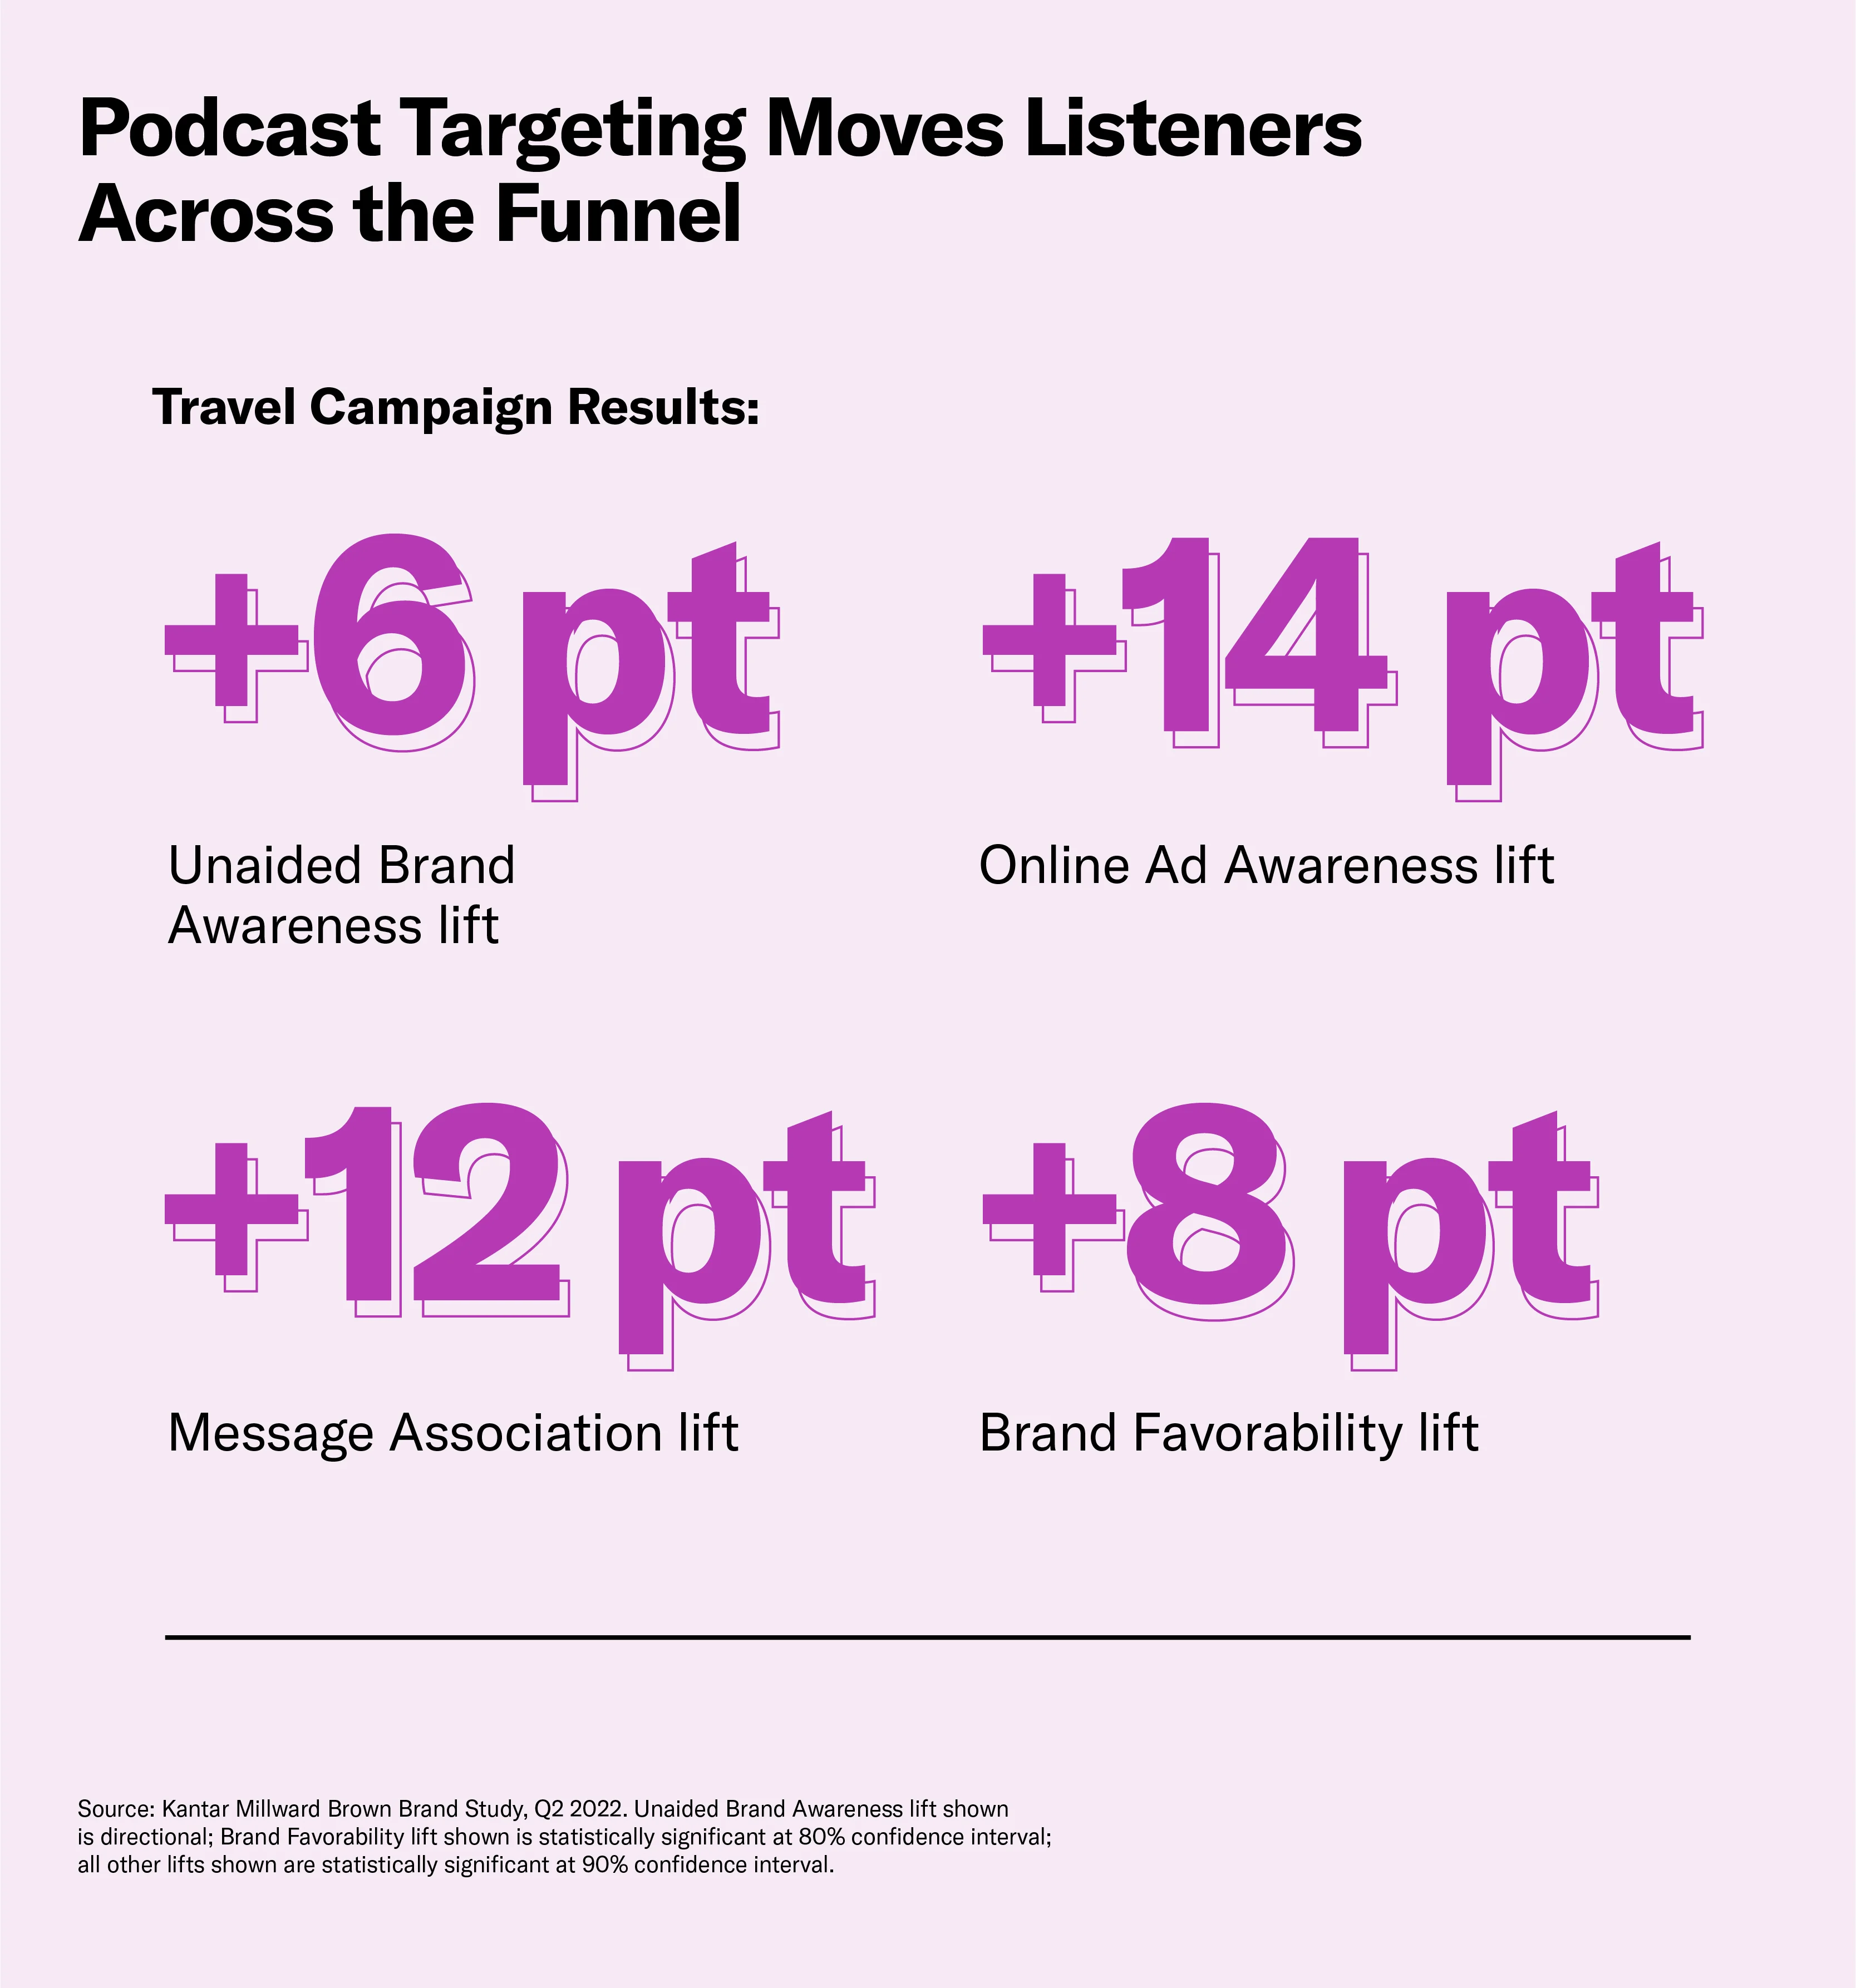 Podcast targeting inspires consumer action across the marketing funnel